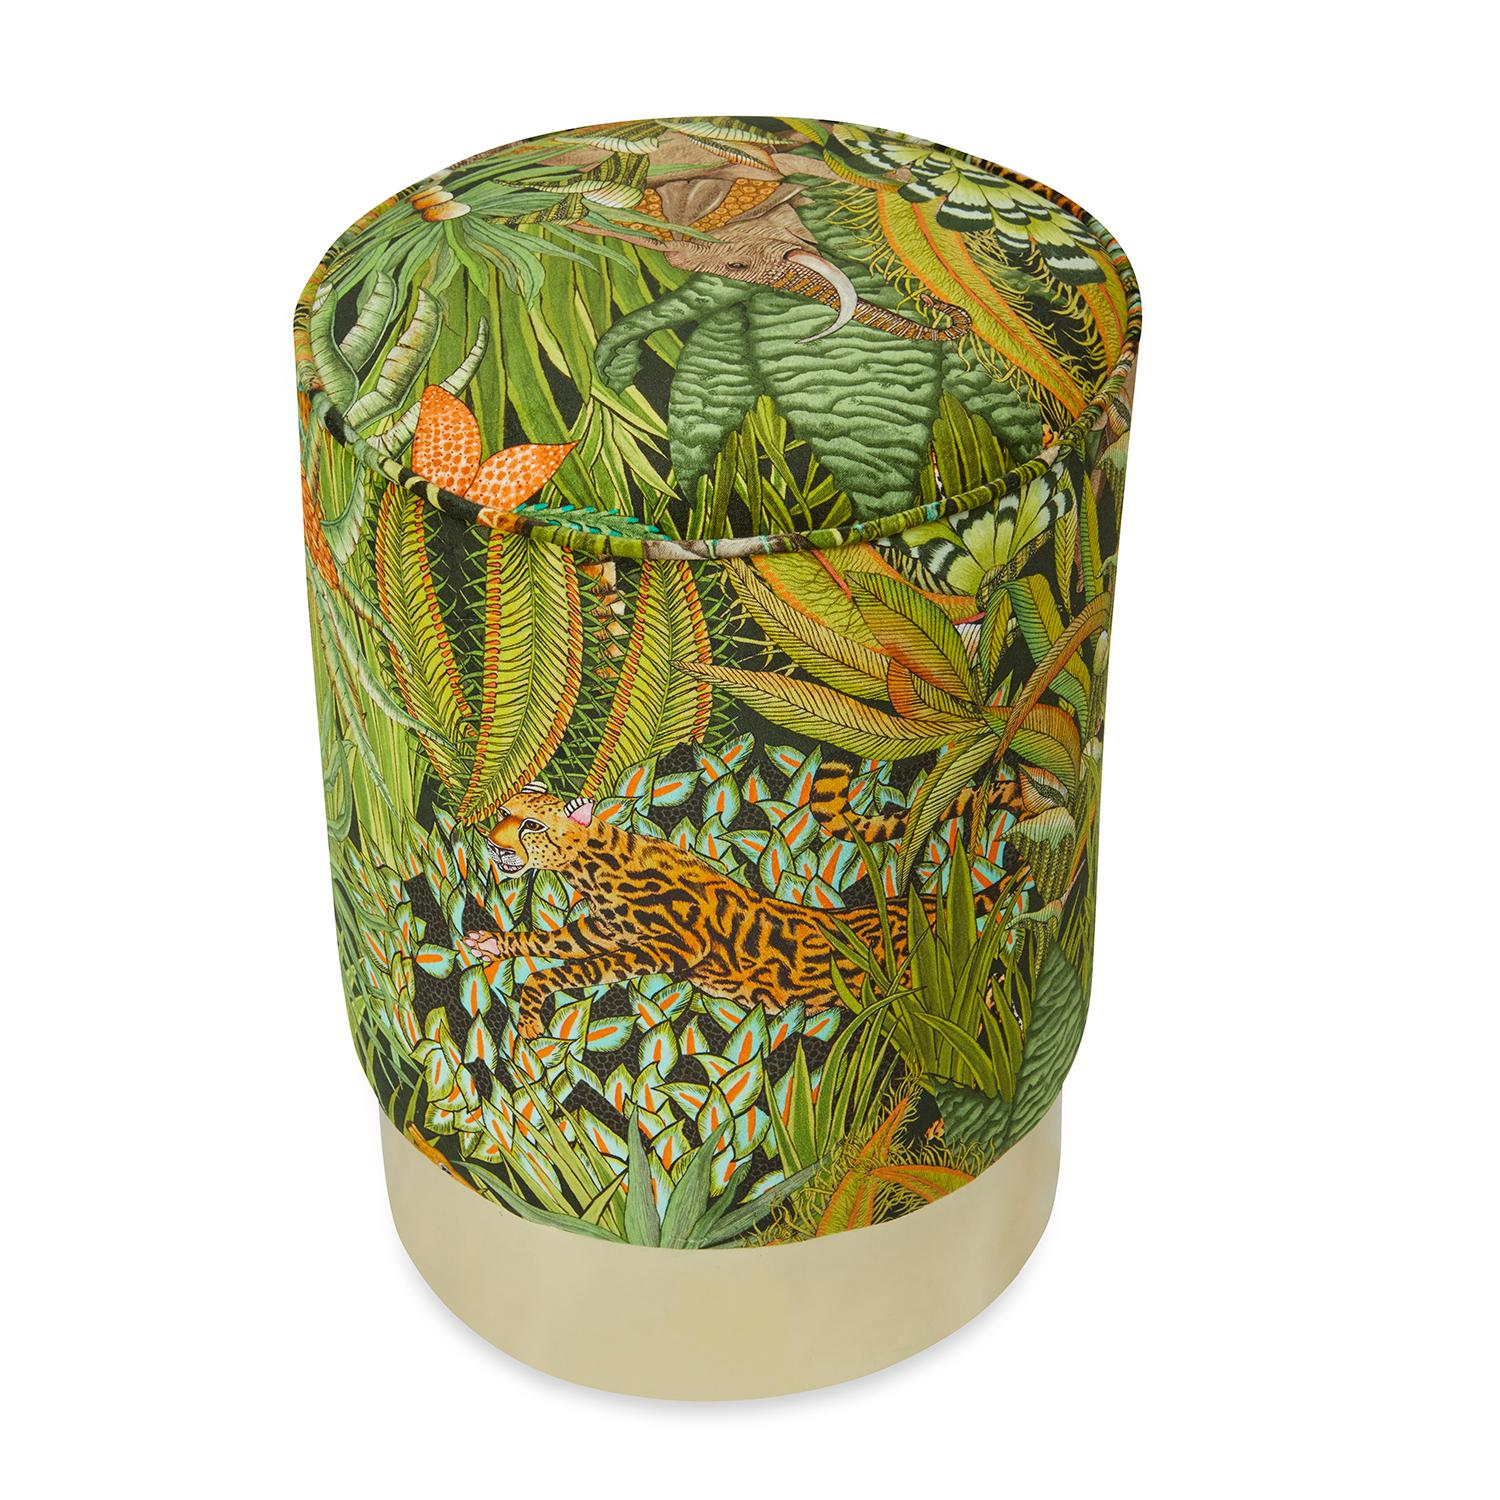 This ottoman's velvet upholstery, inspired by the fauna and flora of South Africa's Kruger National Park, sits atop a gleaming golden base. Ample high-density foam fill ensures long-lasting comfort whether you're using the pouf as a seat or a